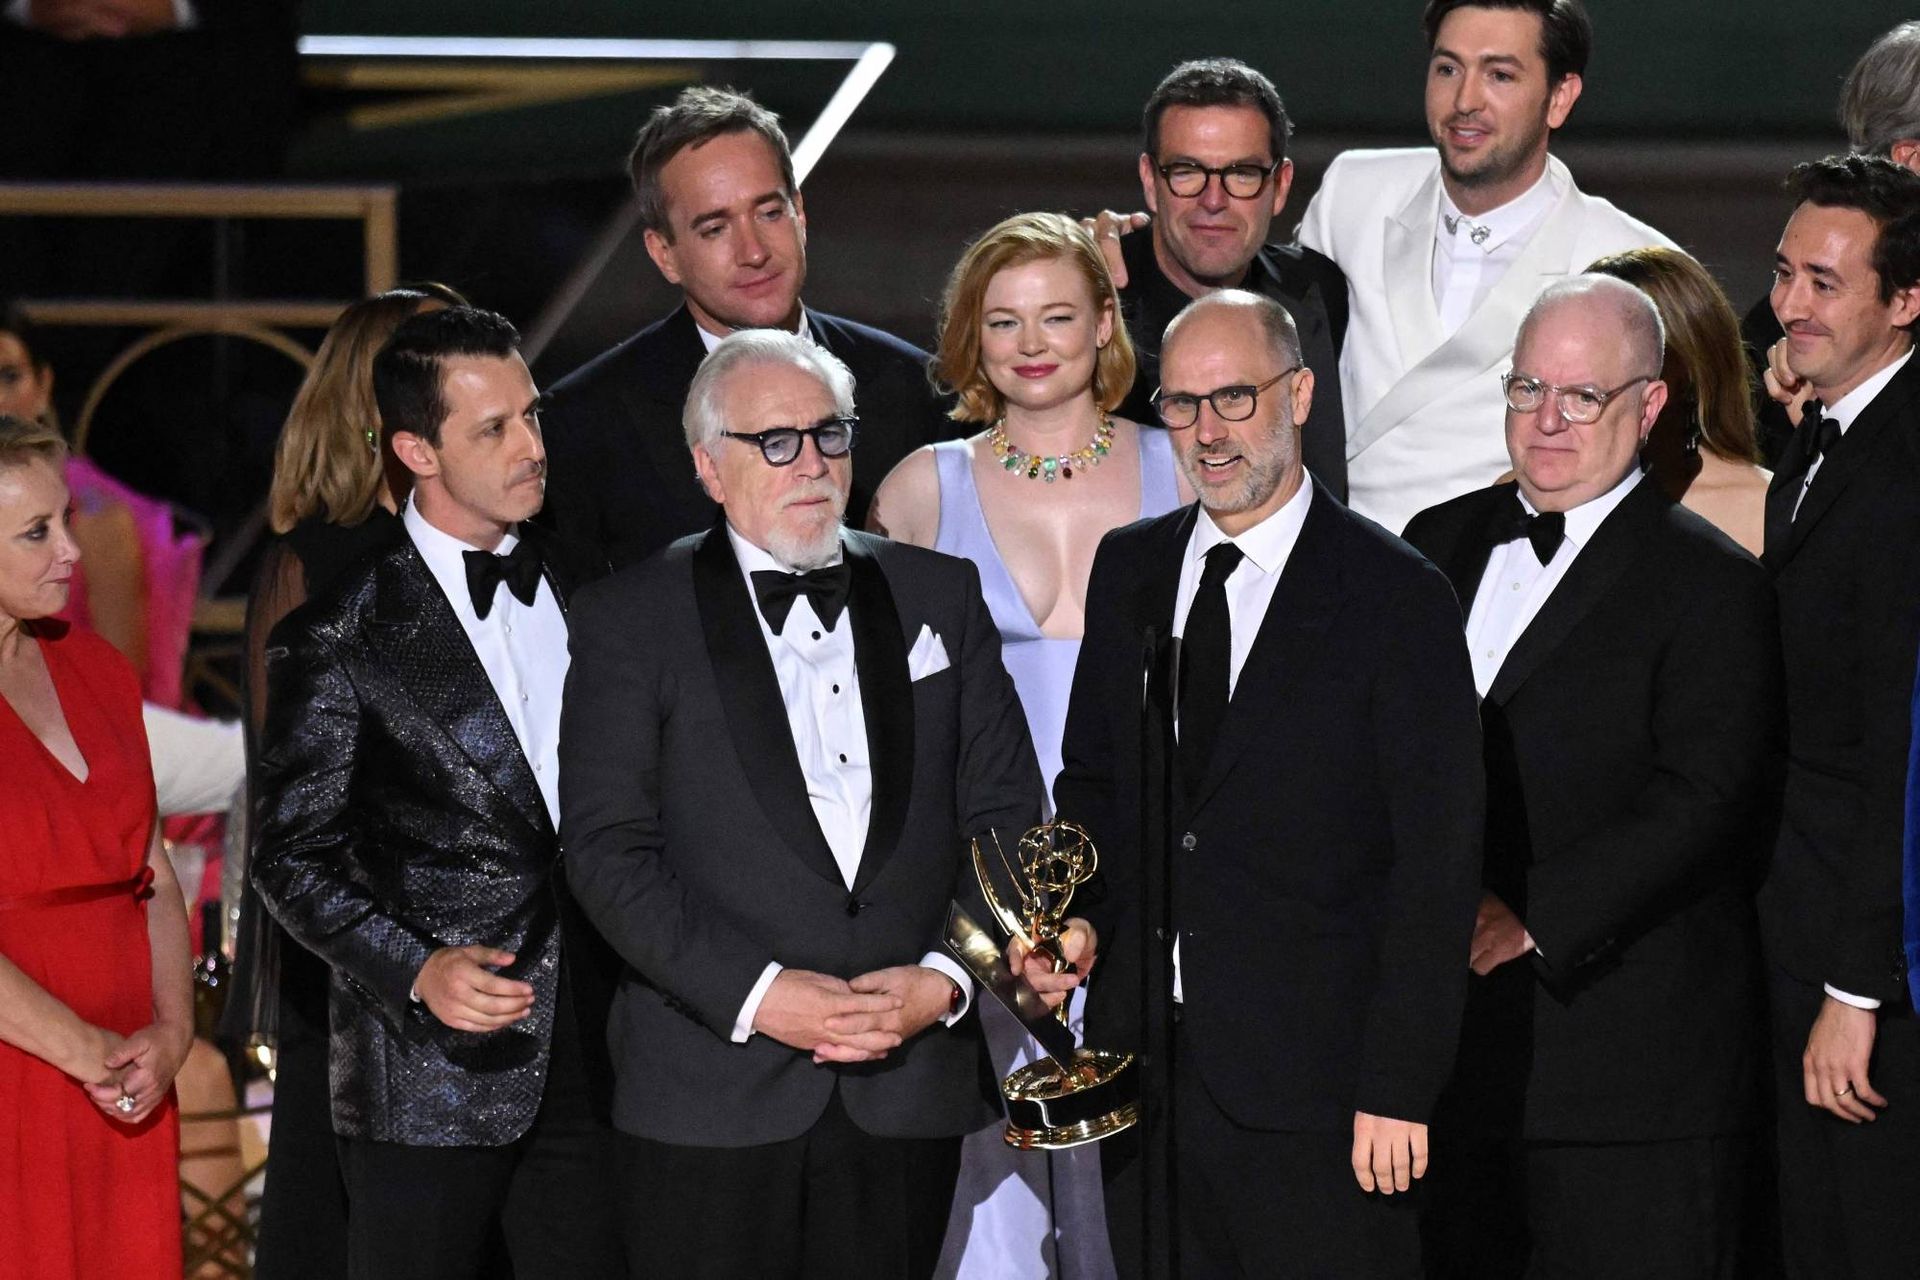 In this article, we are going to be covering the list of Emmy Awards 2022 nominees and winners, so you know if your favorite shows picked up an award or not.